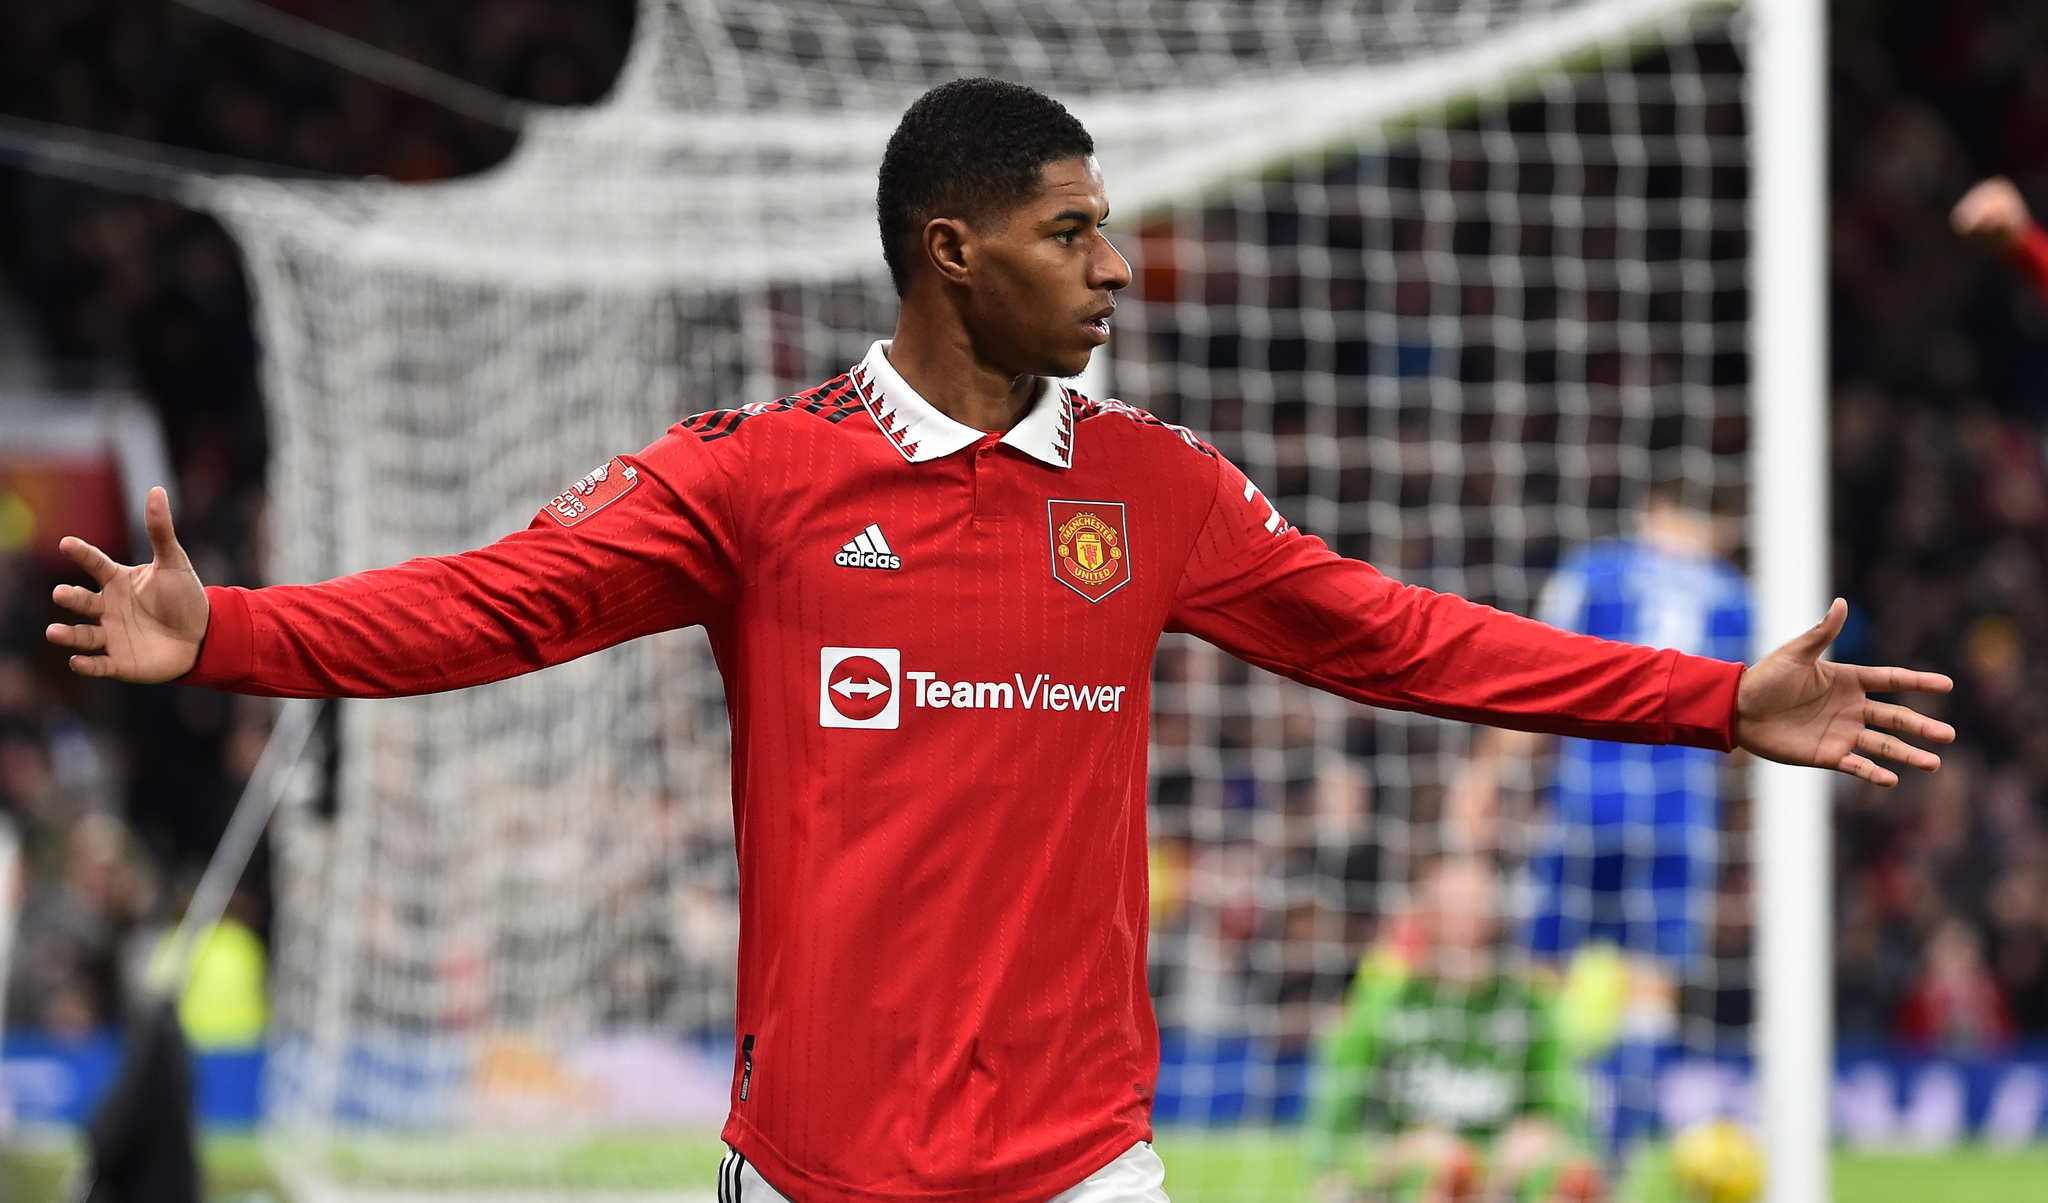 Manchester United's Marcus Rashford reacts after Everton's Conor Coady scored an own goal